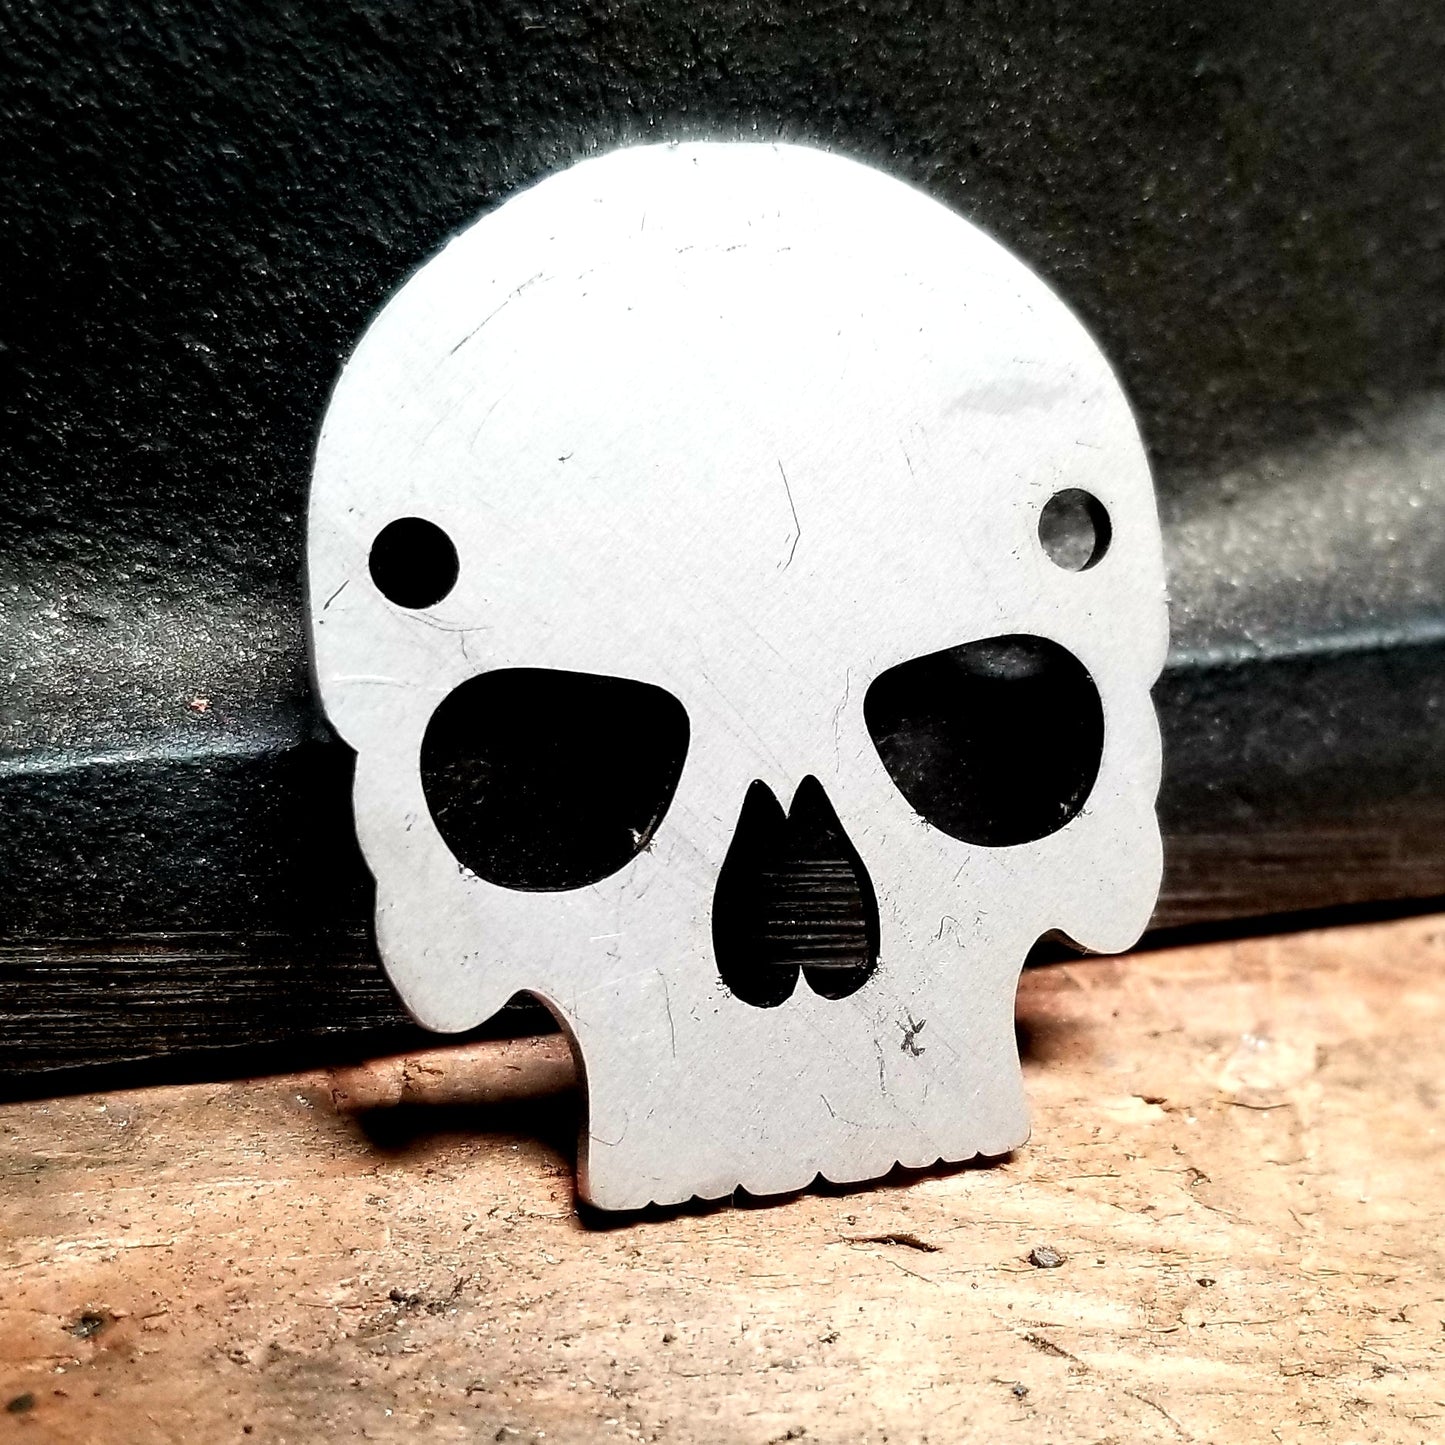 In Stock Reliquary: Stainless 1.5 Inch Tall Skull